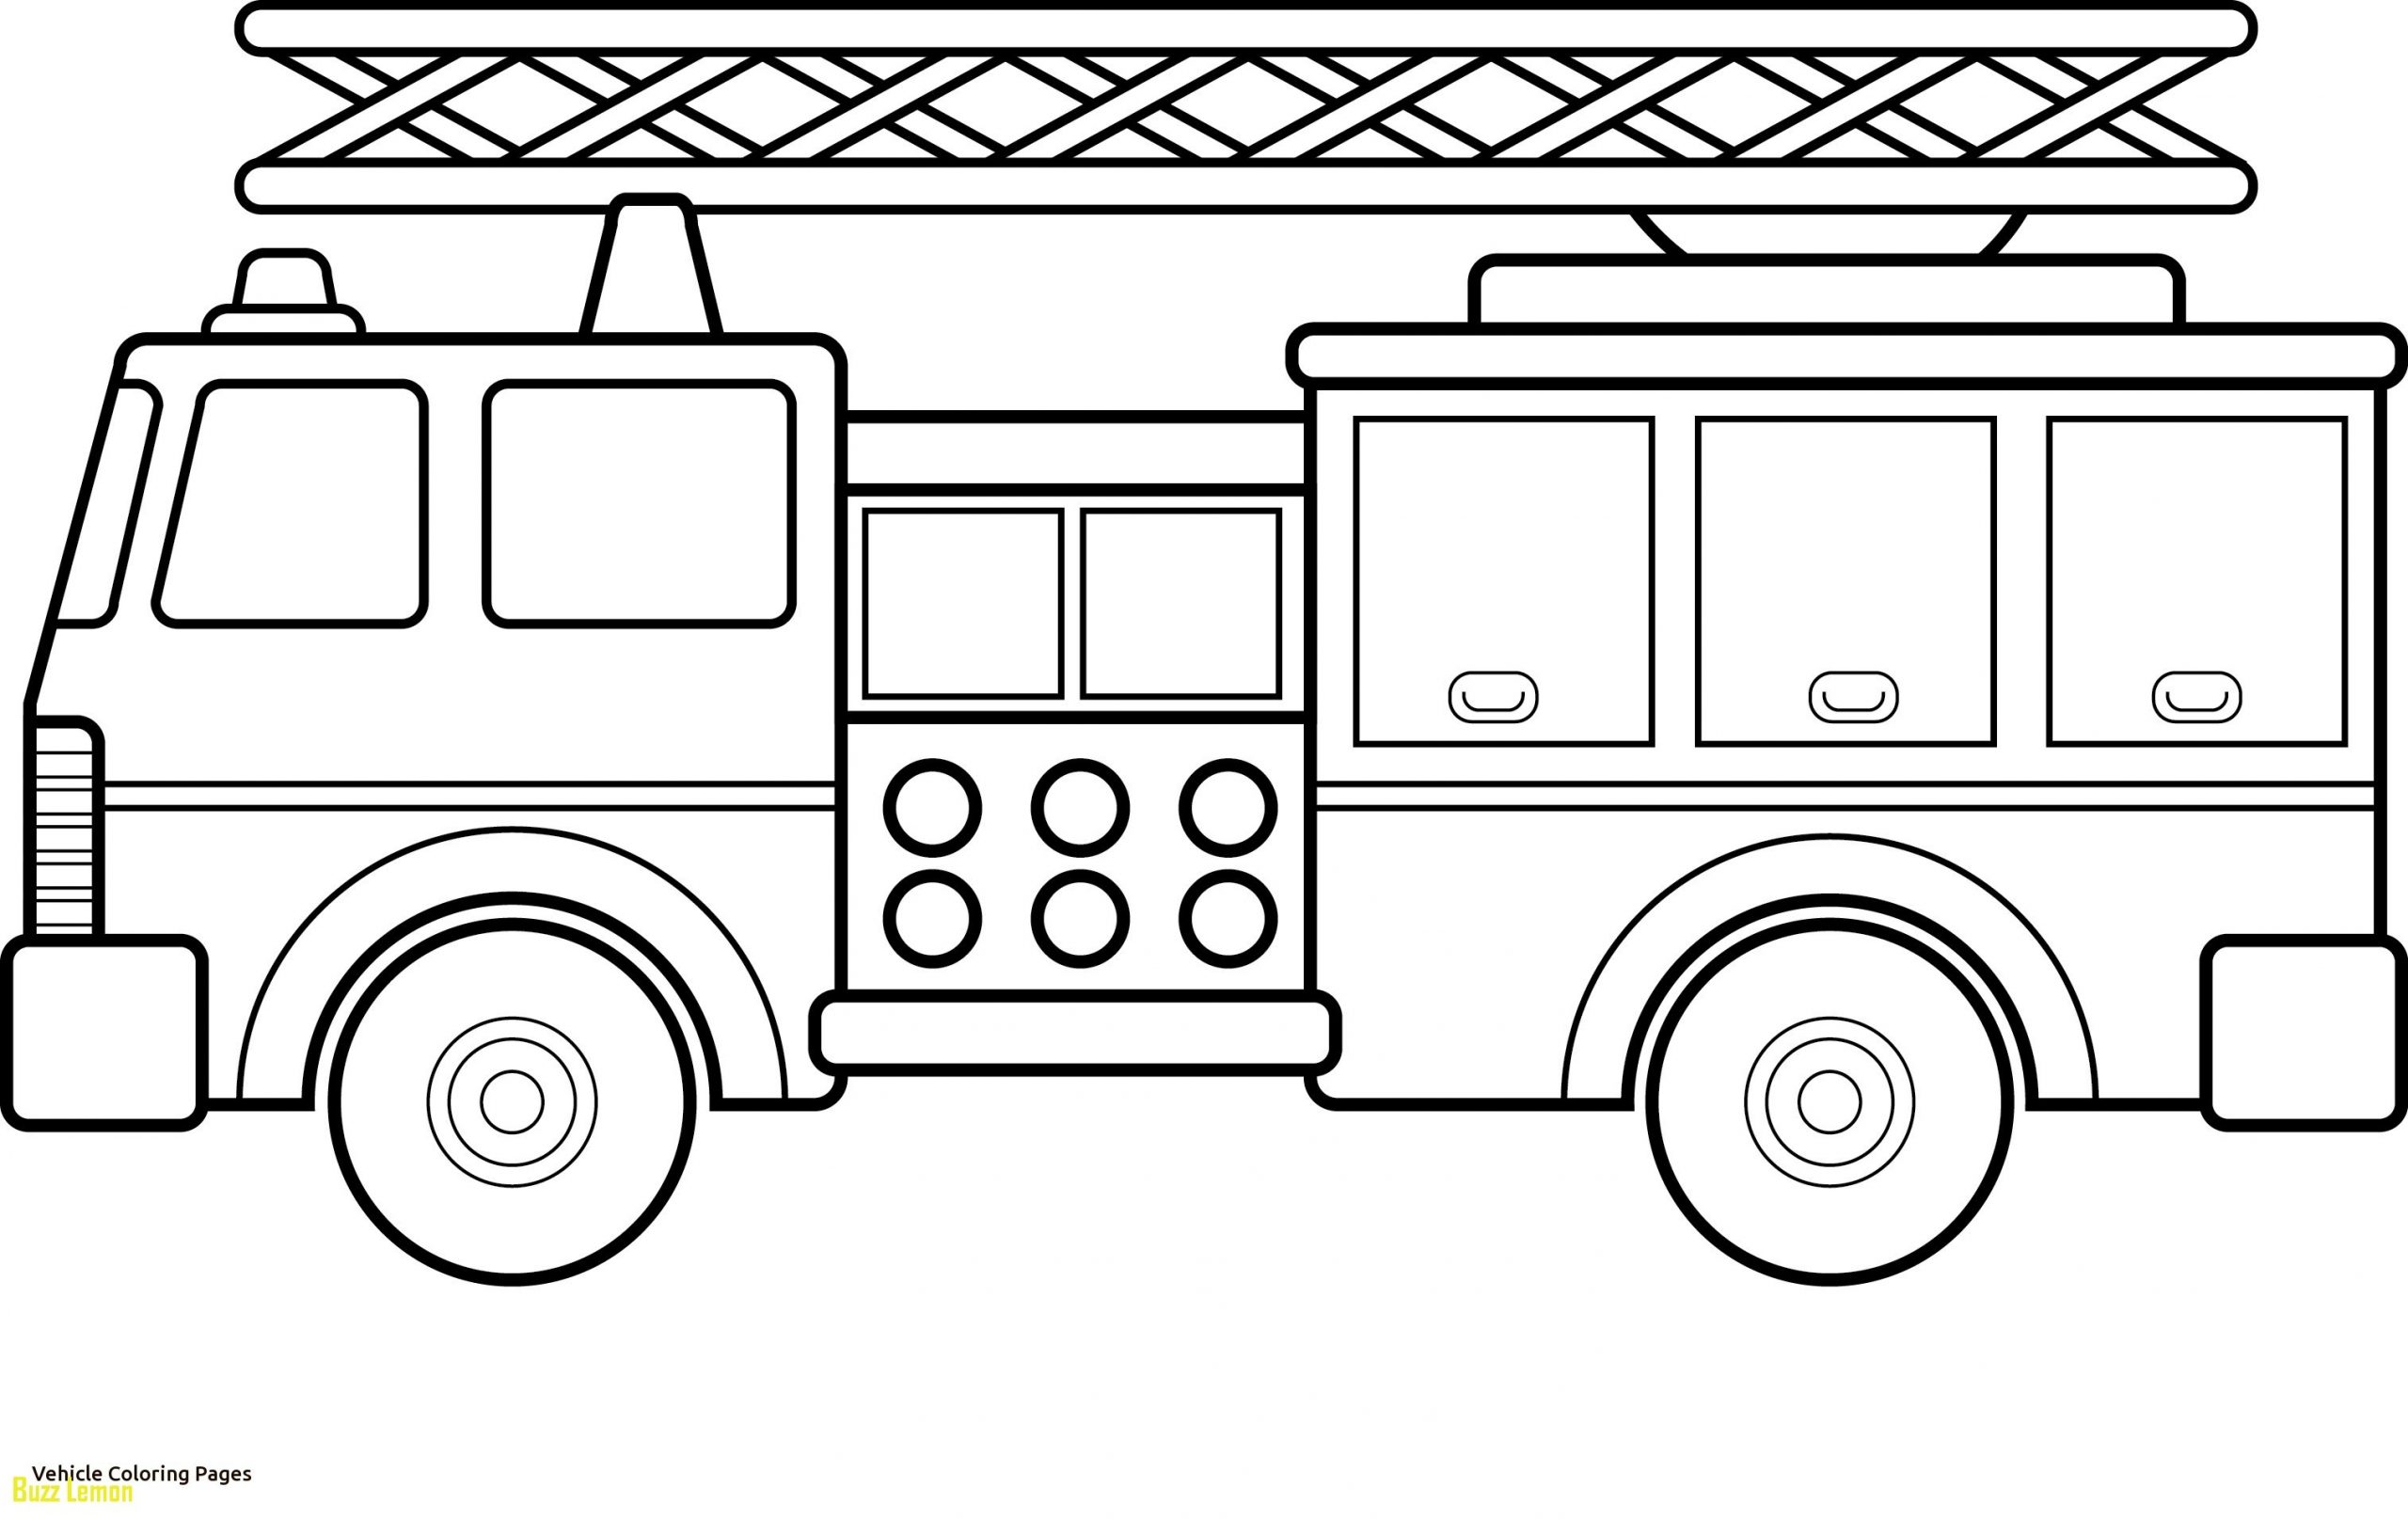 Rescue Vehicles coloring pages Beautiful Coloring Page Vehicles Inspirational Truck Coloring Pages Beautiful